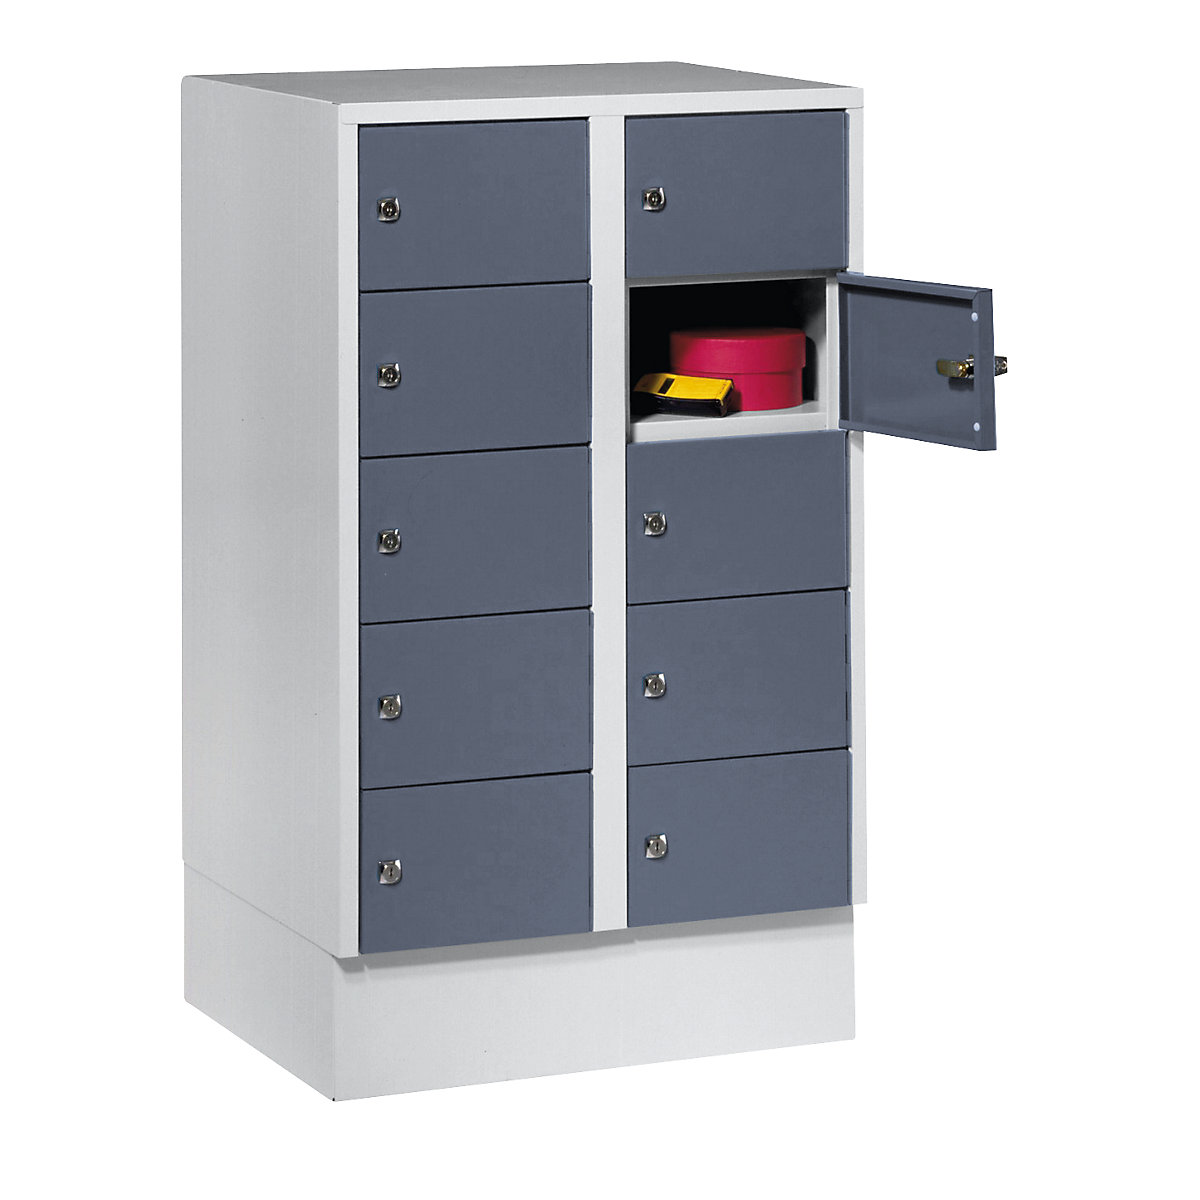 Small locker cupboard – Wolf, 10 compartments, HxW 990 x 600 mm, door colour blue grey RAL 7031-8